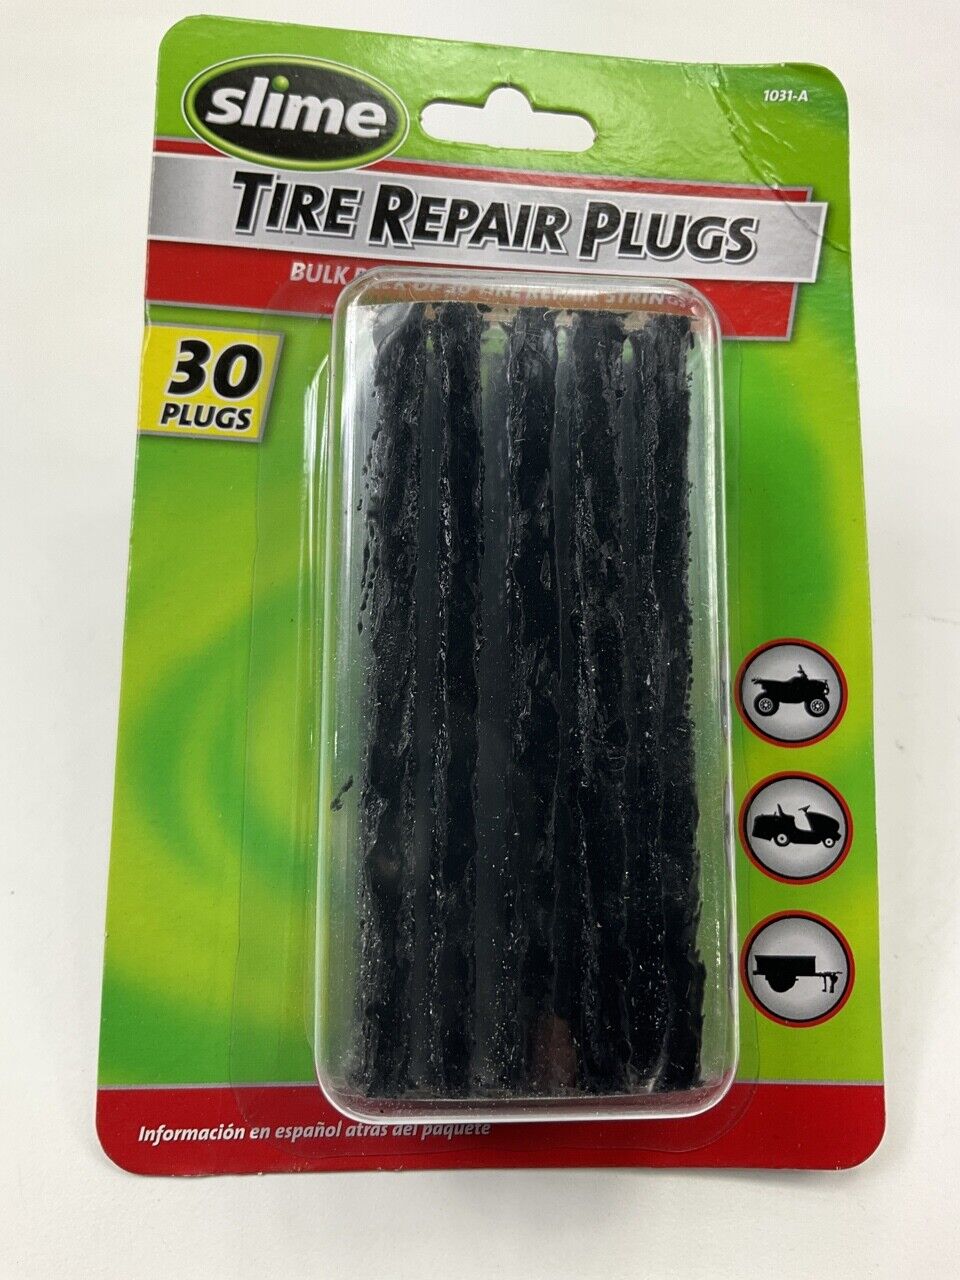 Slime 1031-A Tire Repair Plugs For Tubeless Off-Road Tires, 30 / PACK